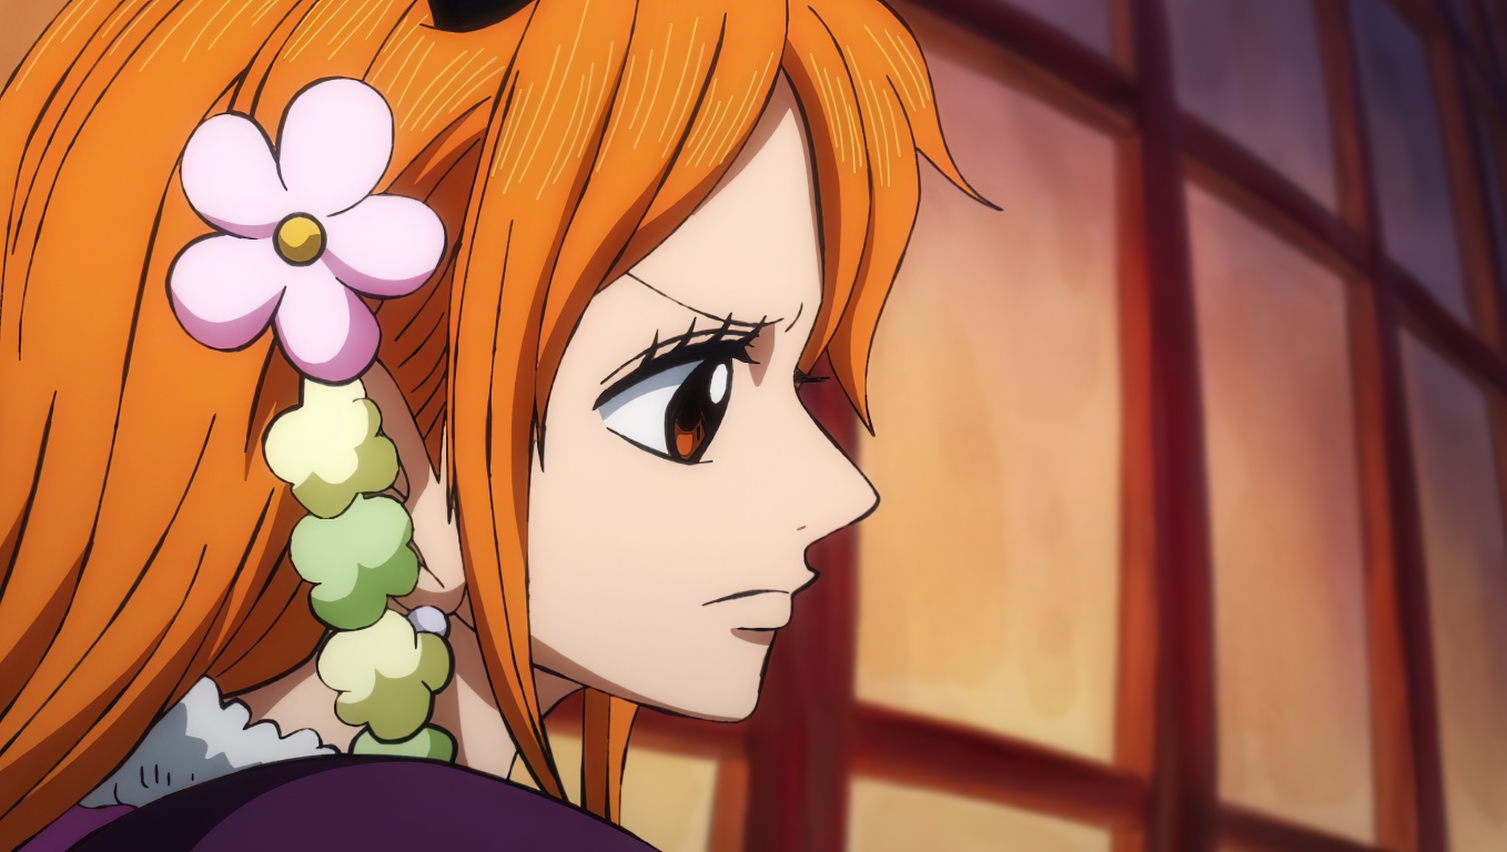 Nami in episode 929 - One Piece by Berg-anime on DeviantArt